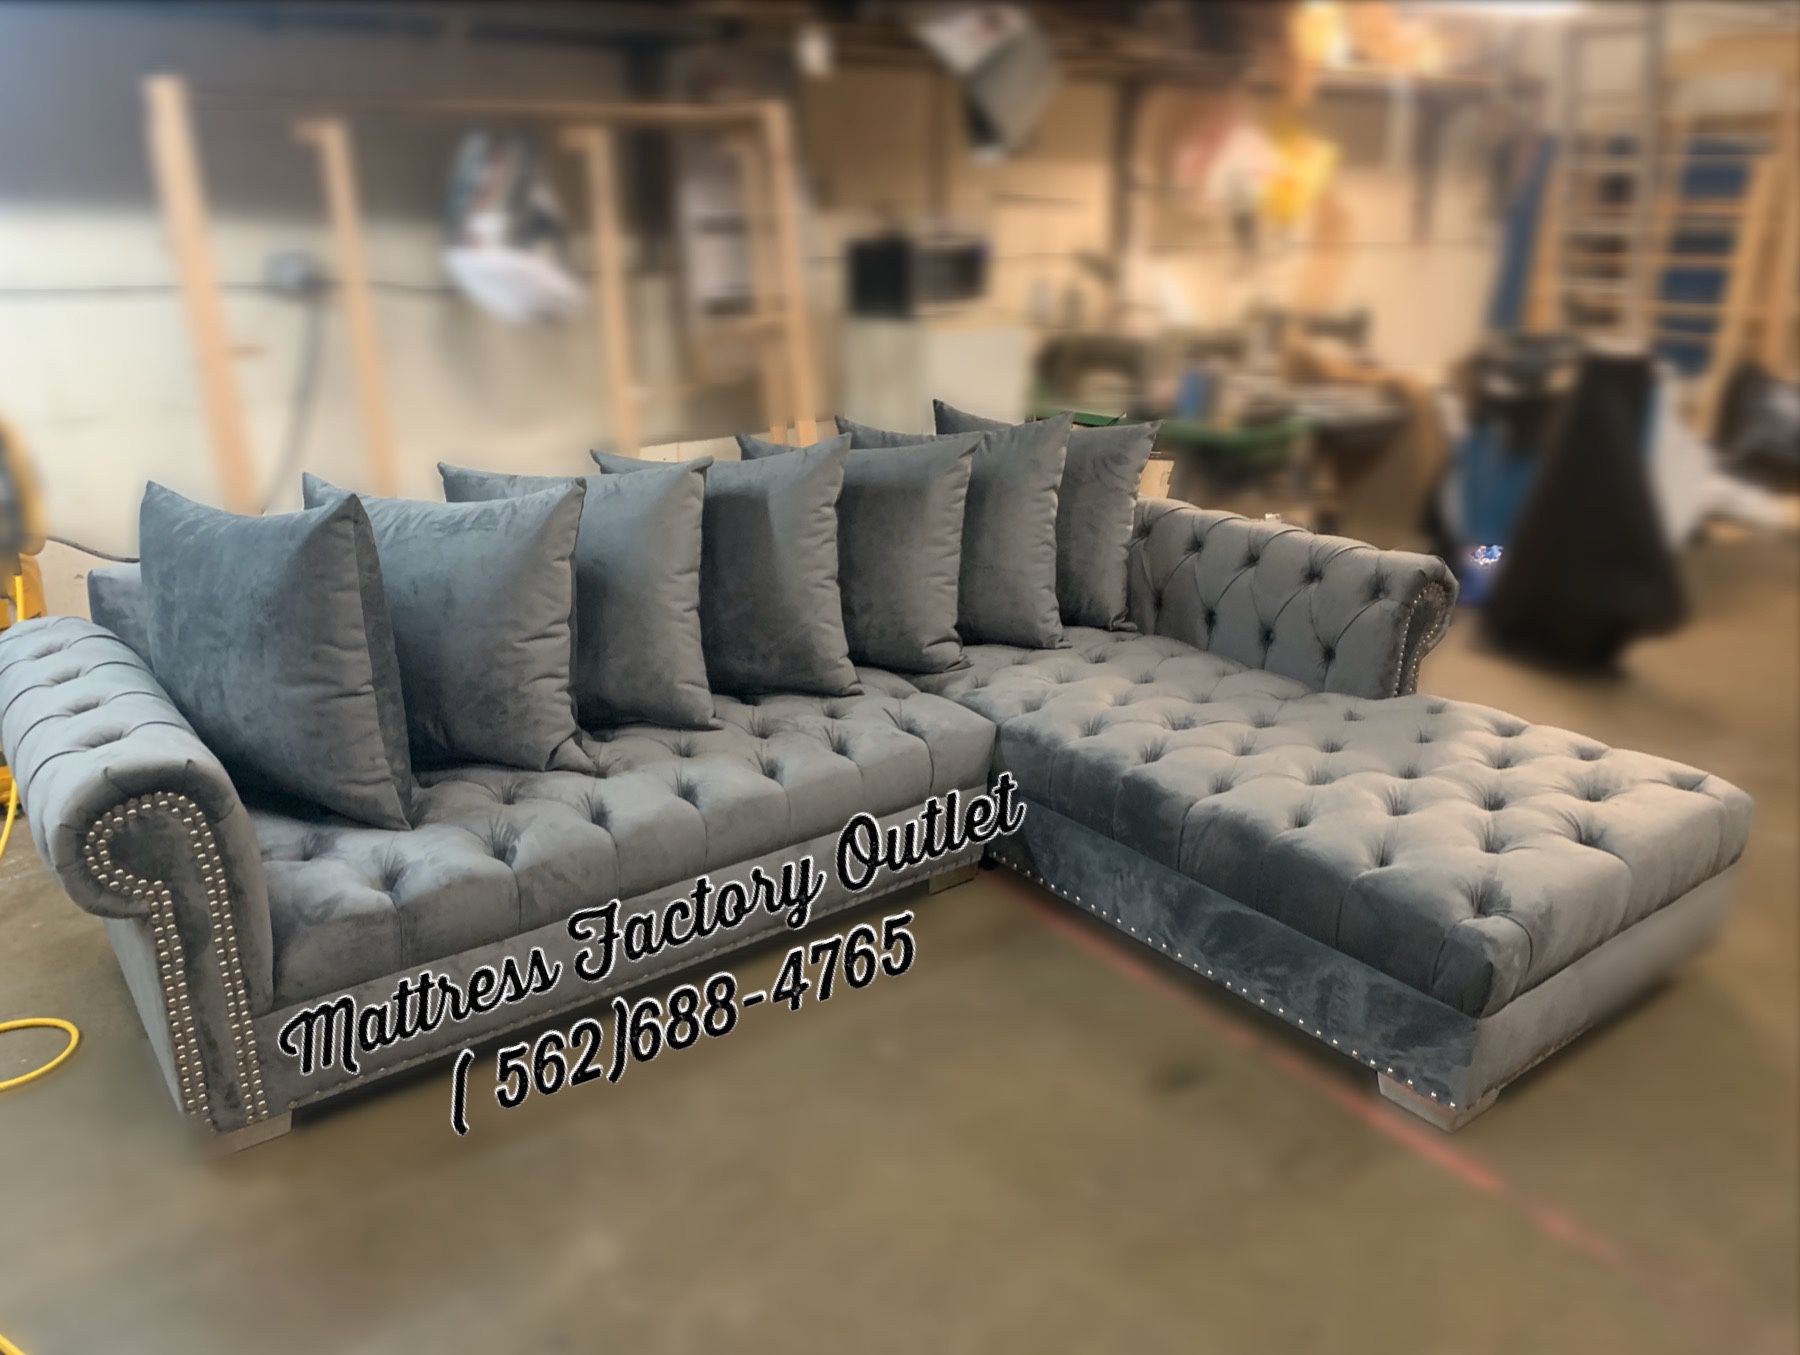 Custom couches made to order this model starts at $1400